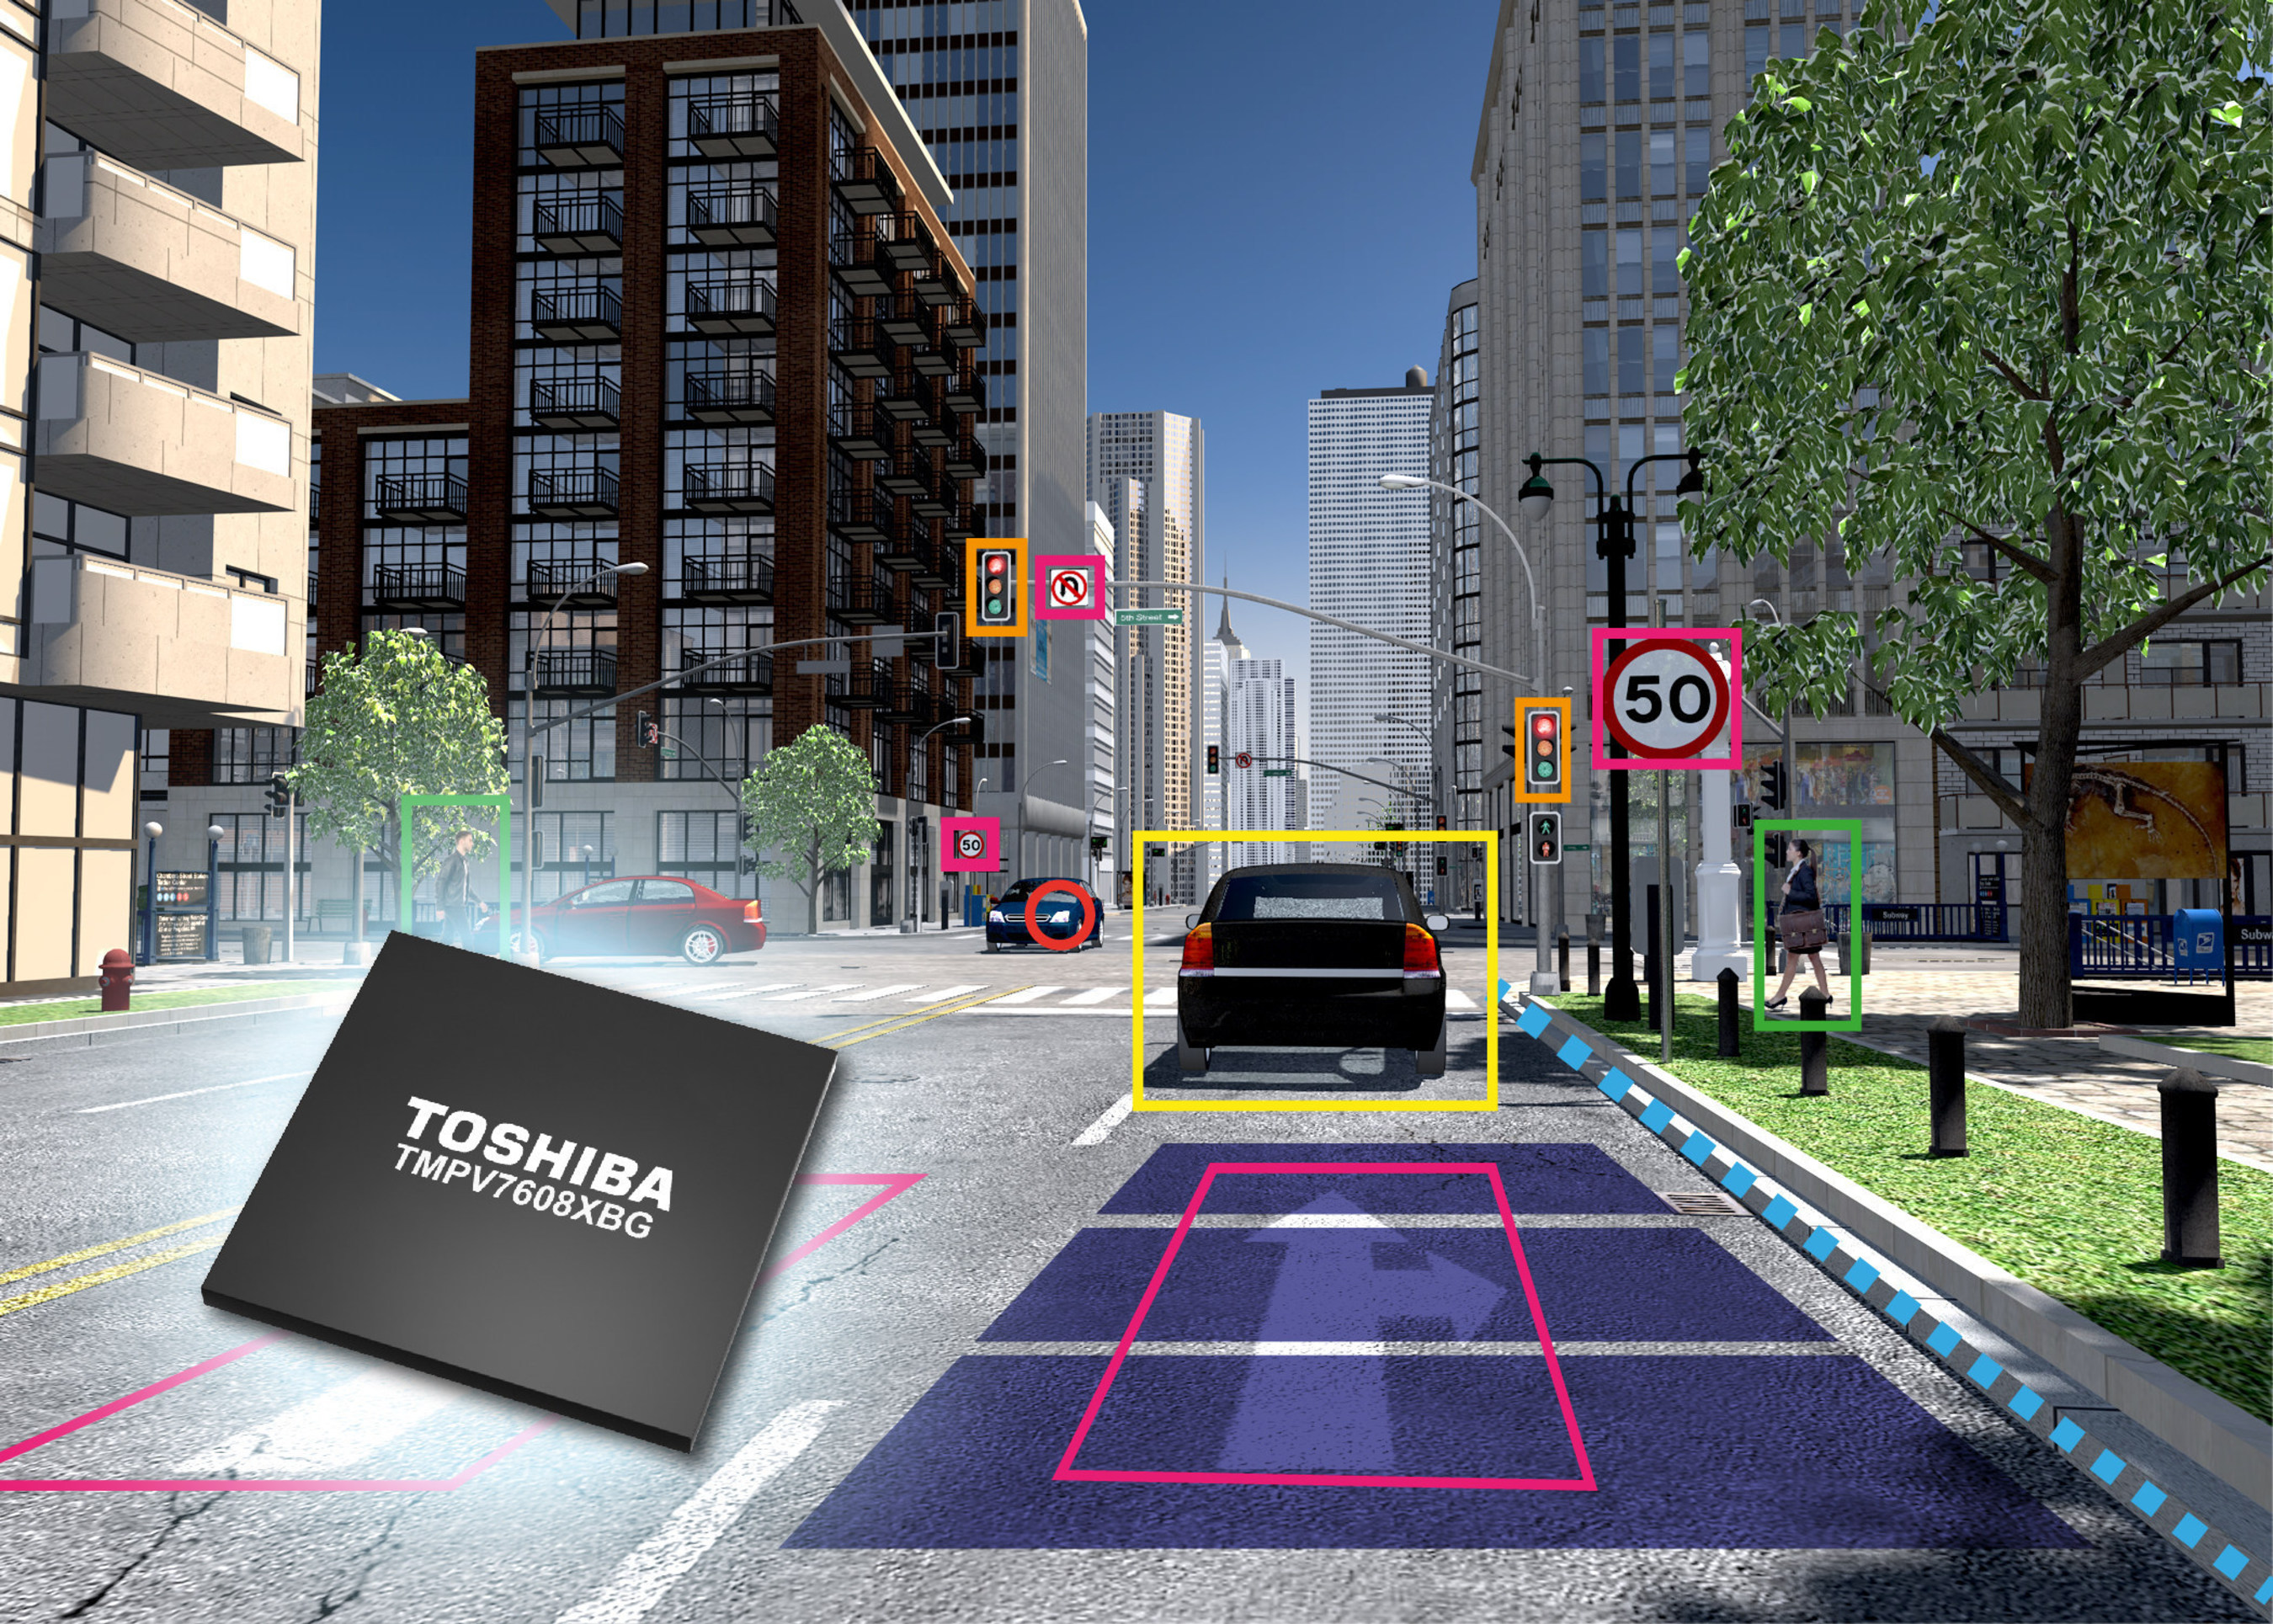 The first device in Toshiba's new TMPV760 series of image recognition processors will simplify implementation of next-generation Advanced Driver Assist Systems (ADAS).